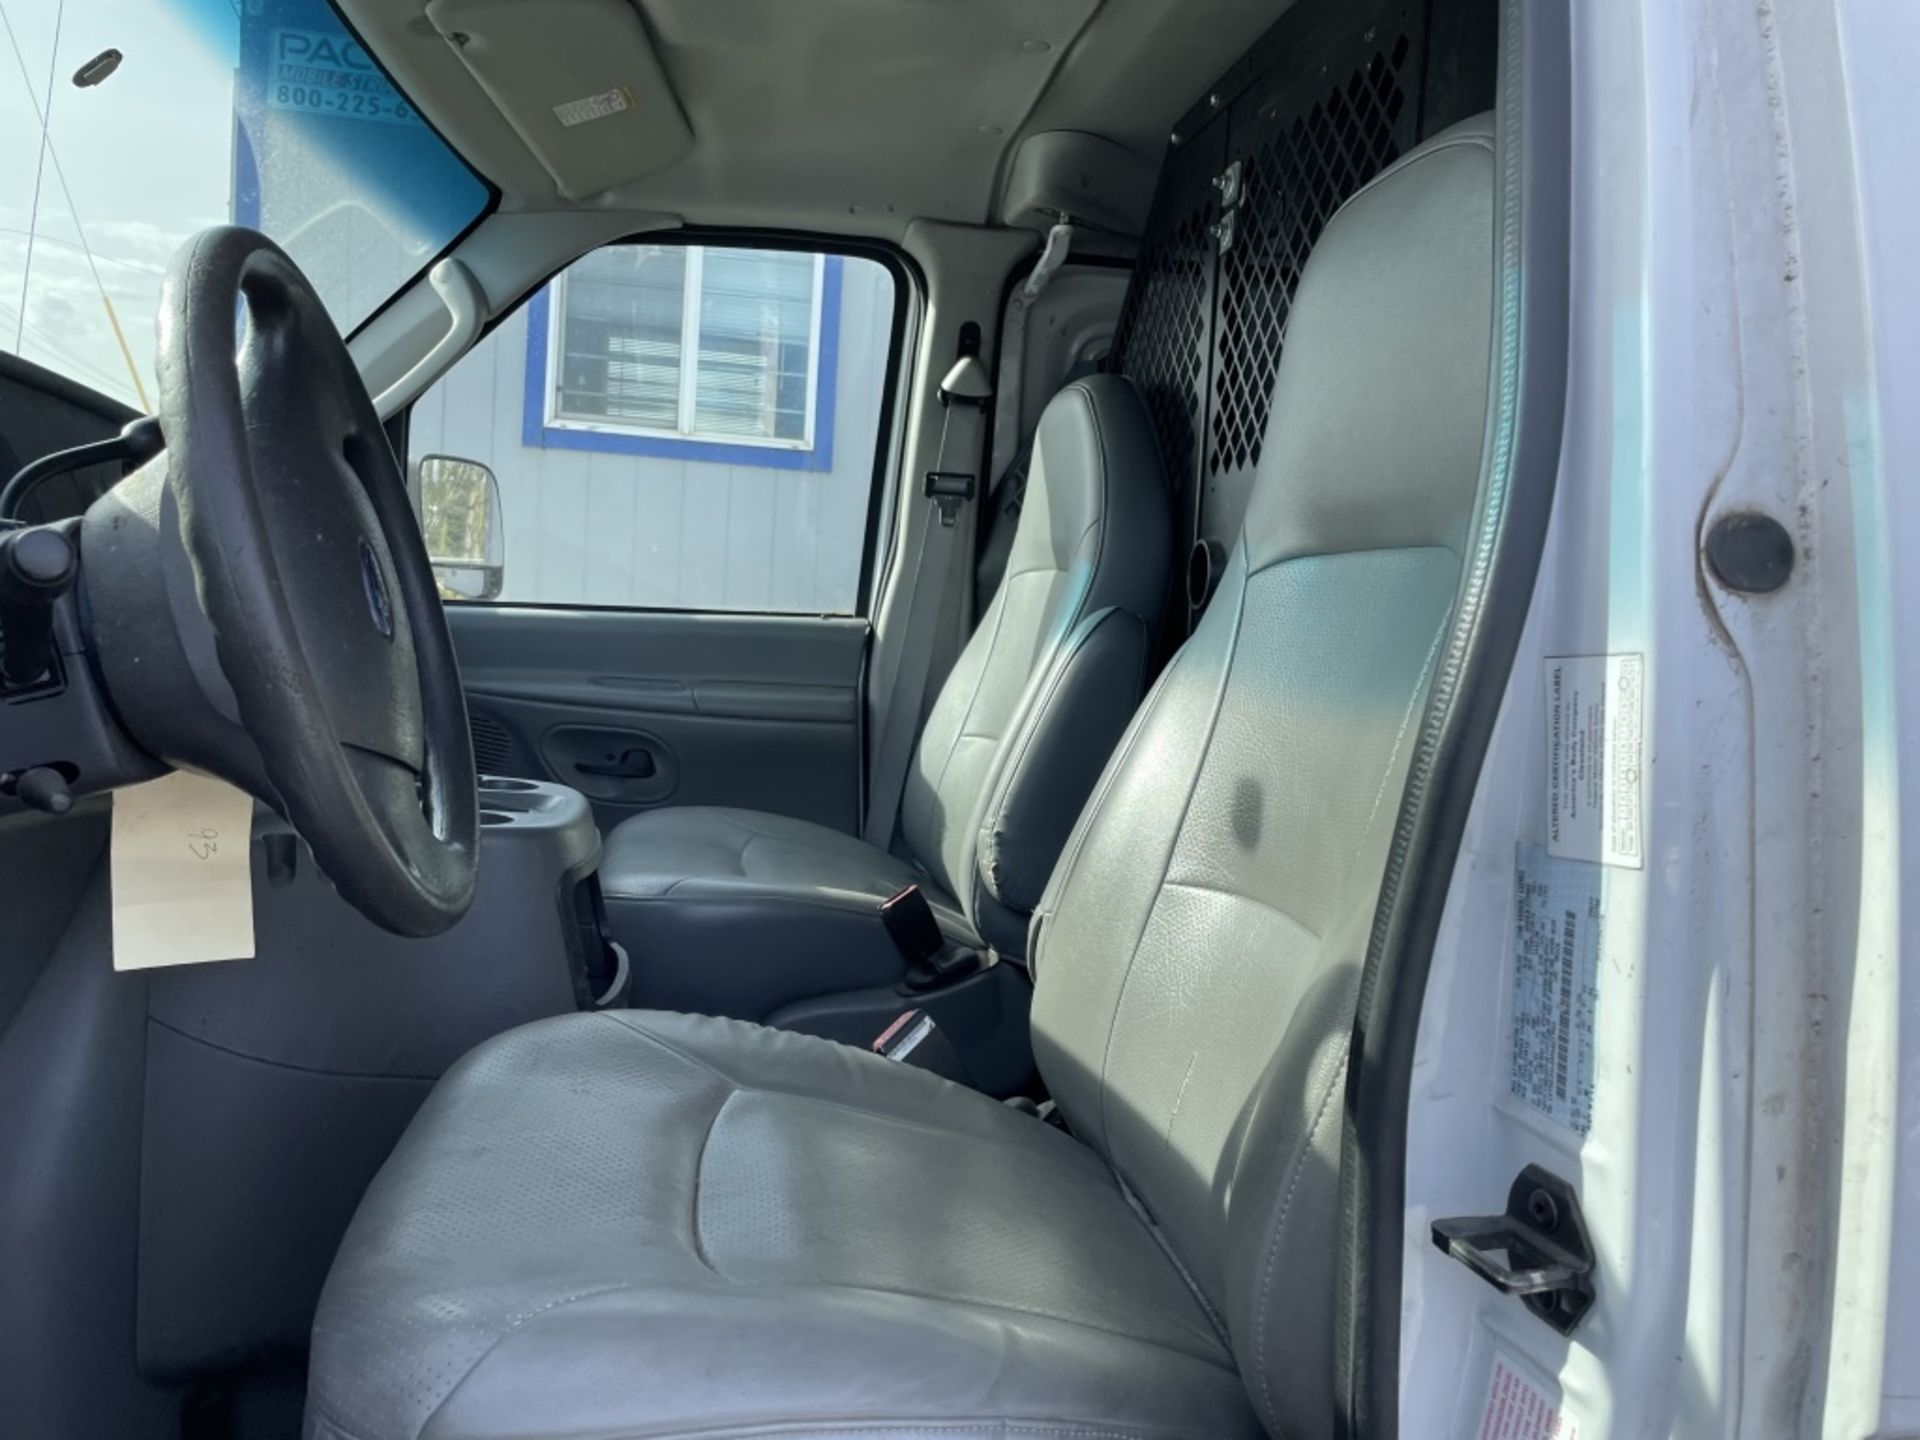 2004 Ford E350 SD Cargo Van - Image 9 of 14